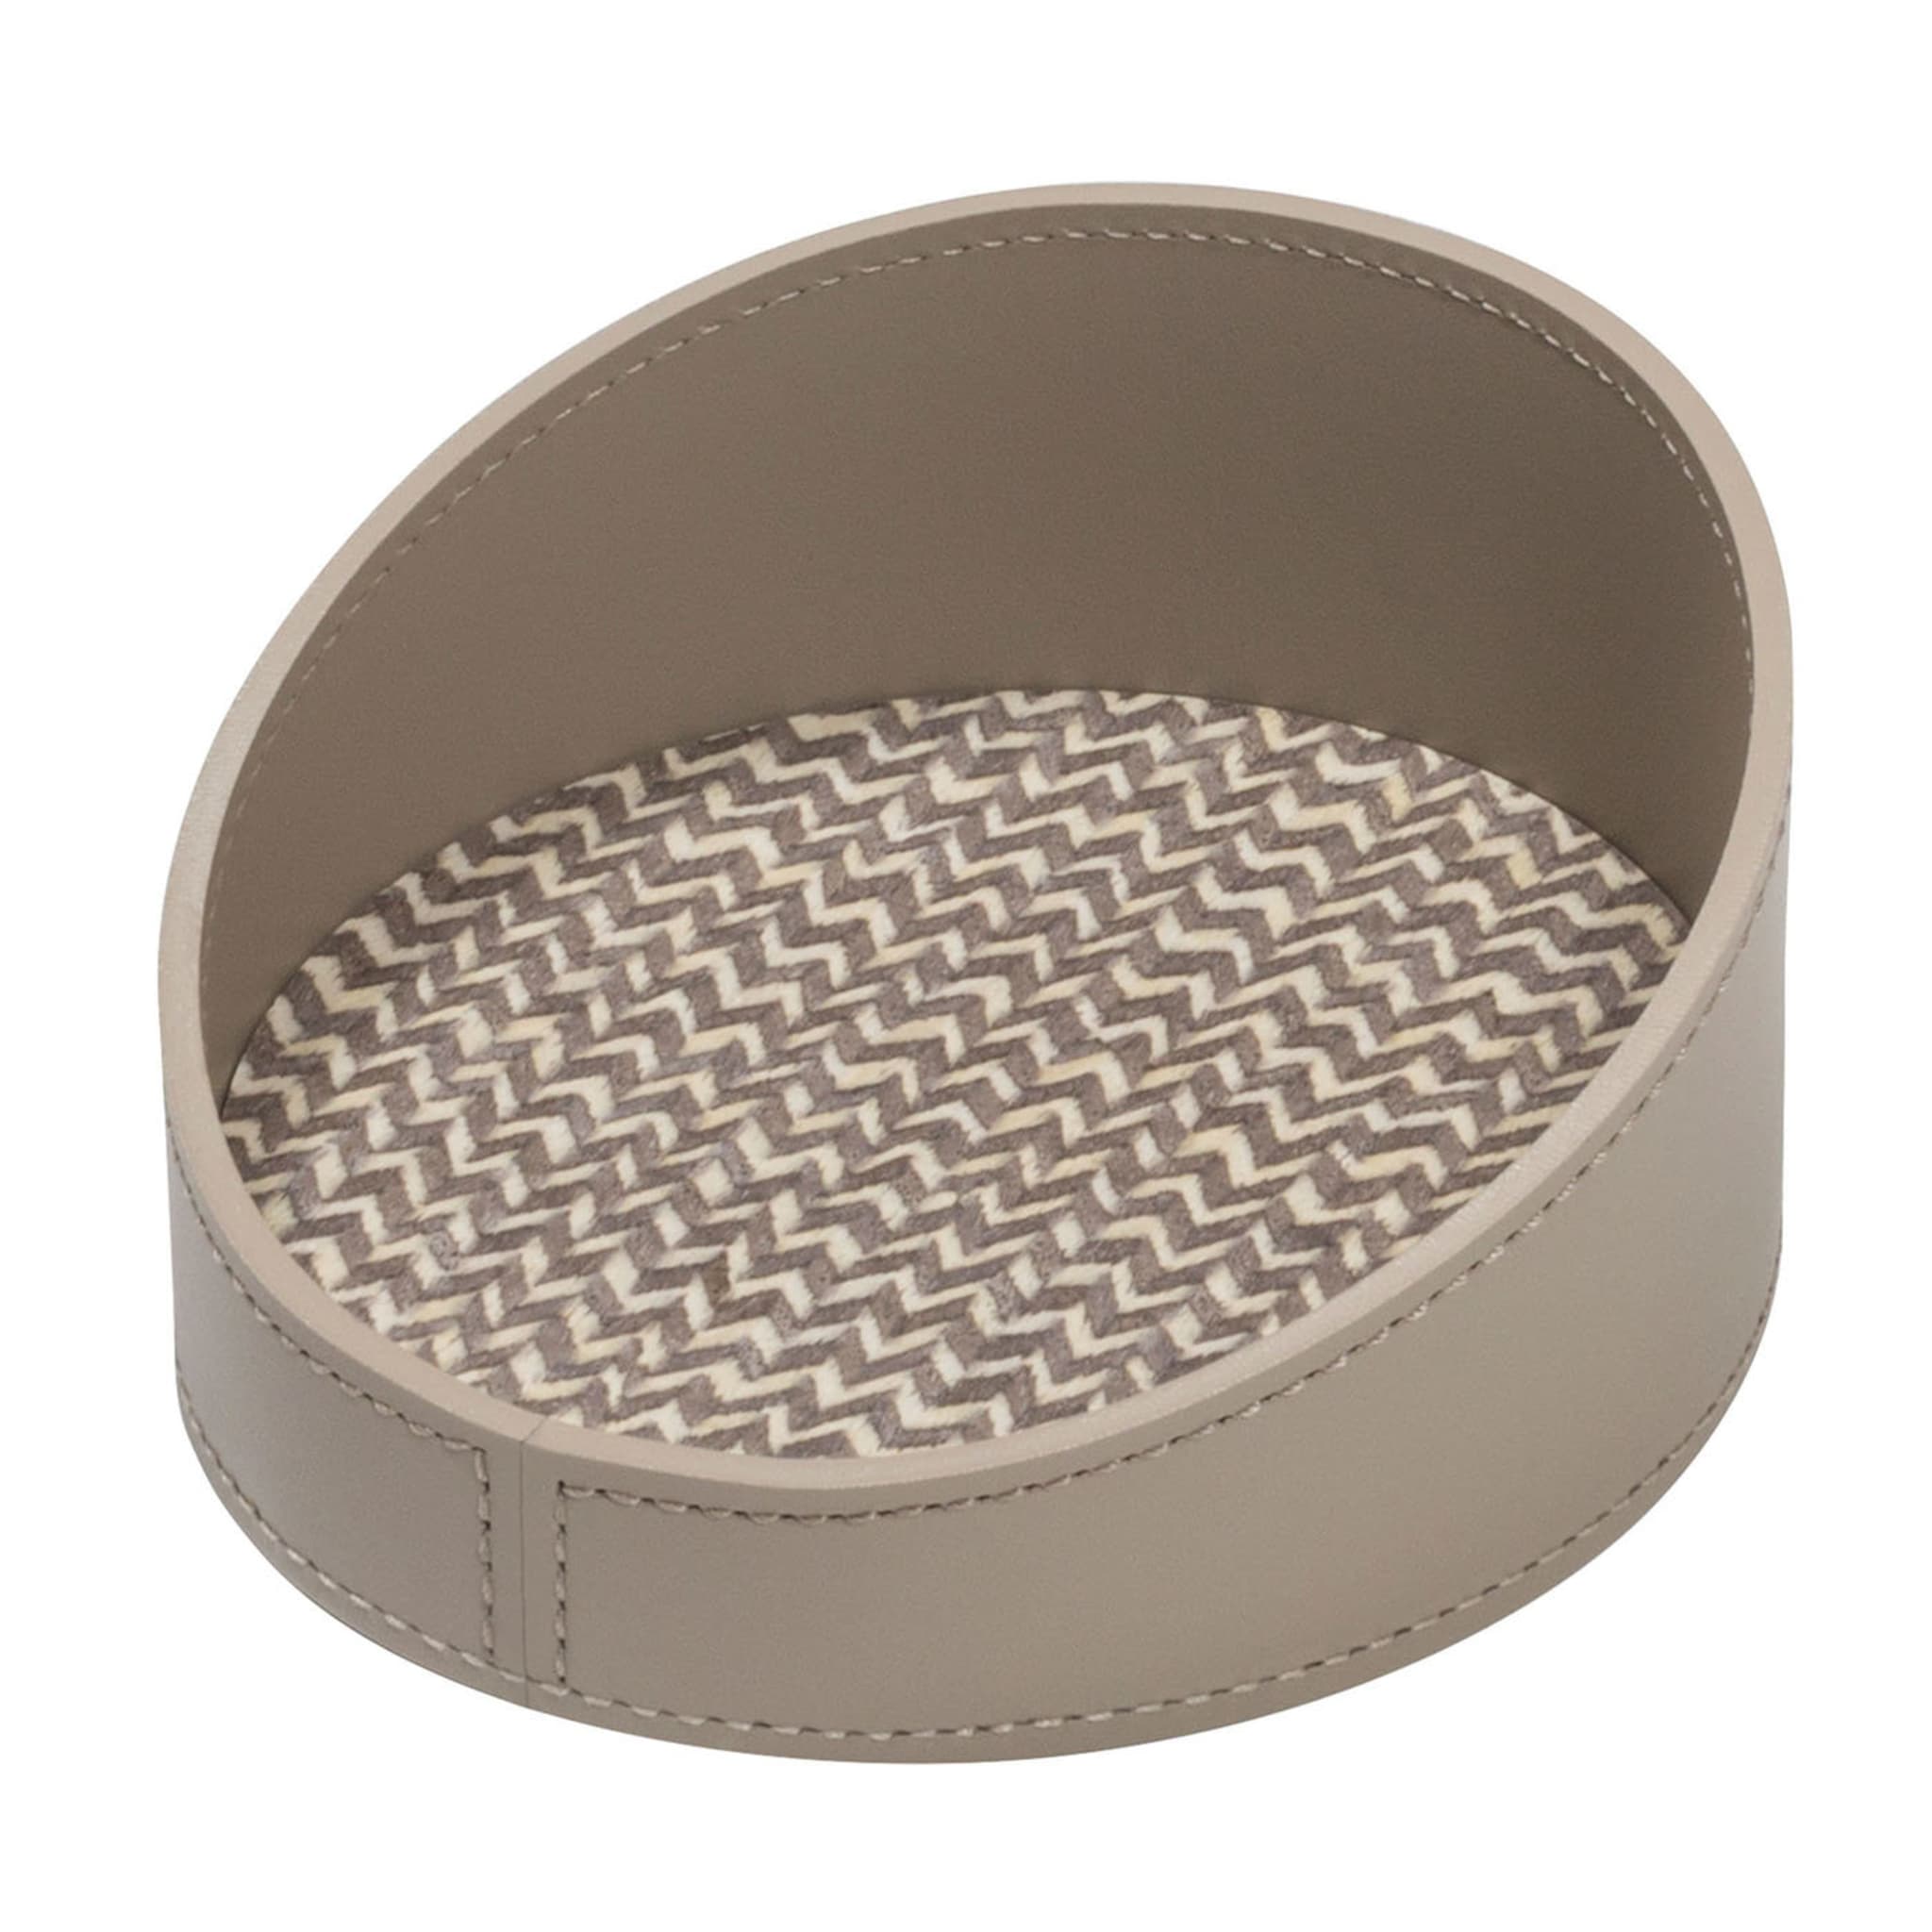 Chevron Beige Oval Small Valet Tray - Main view